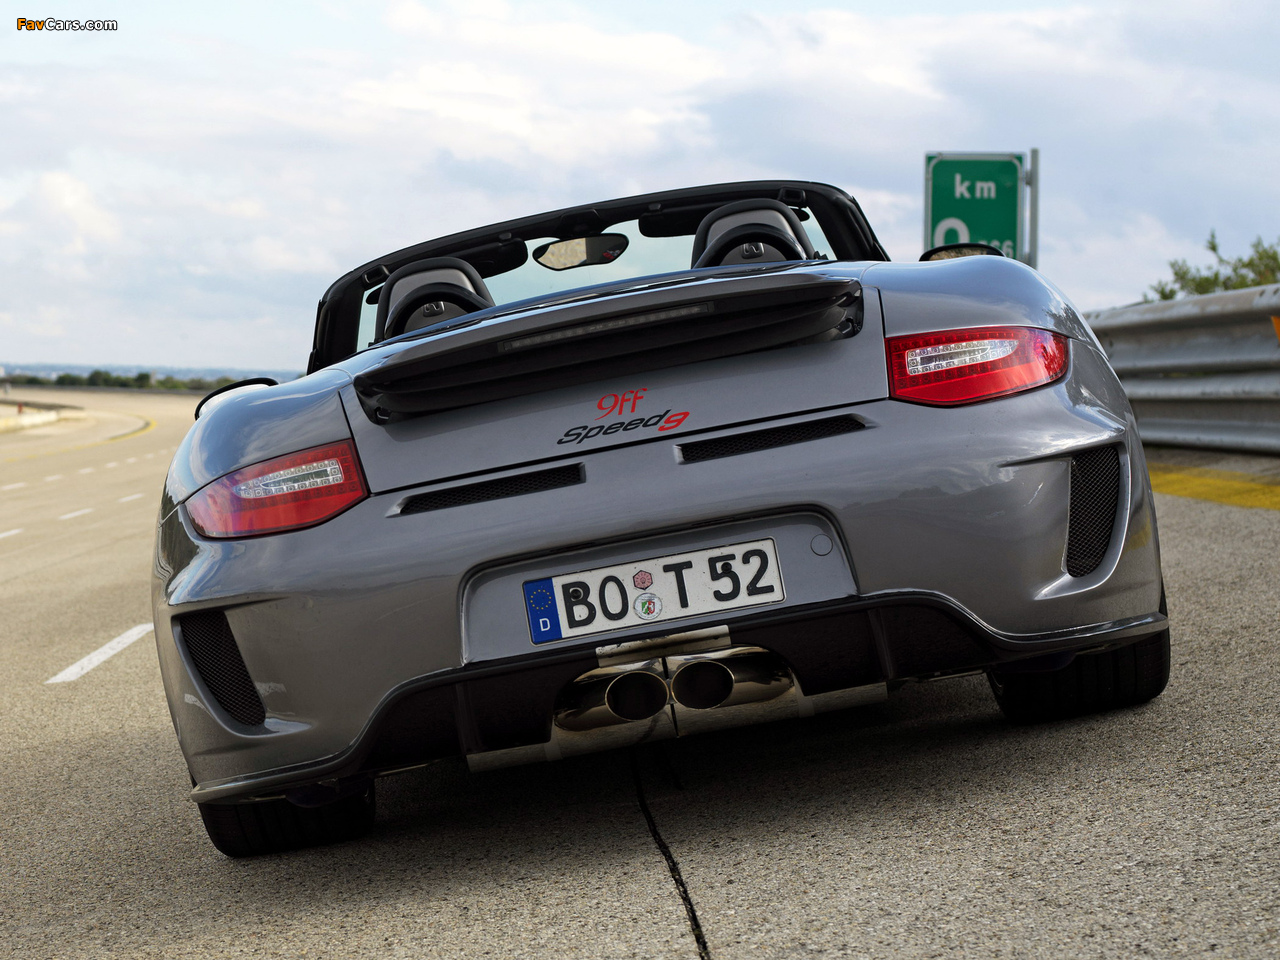 9ff Speed9 Cabriolet (997) 2010 pictures (1280 x 960)